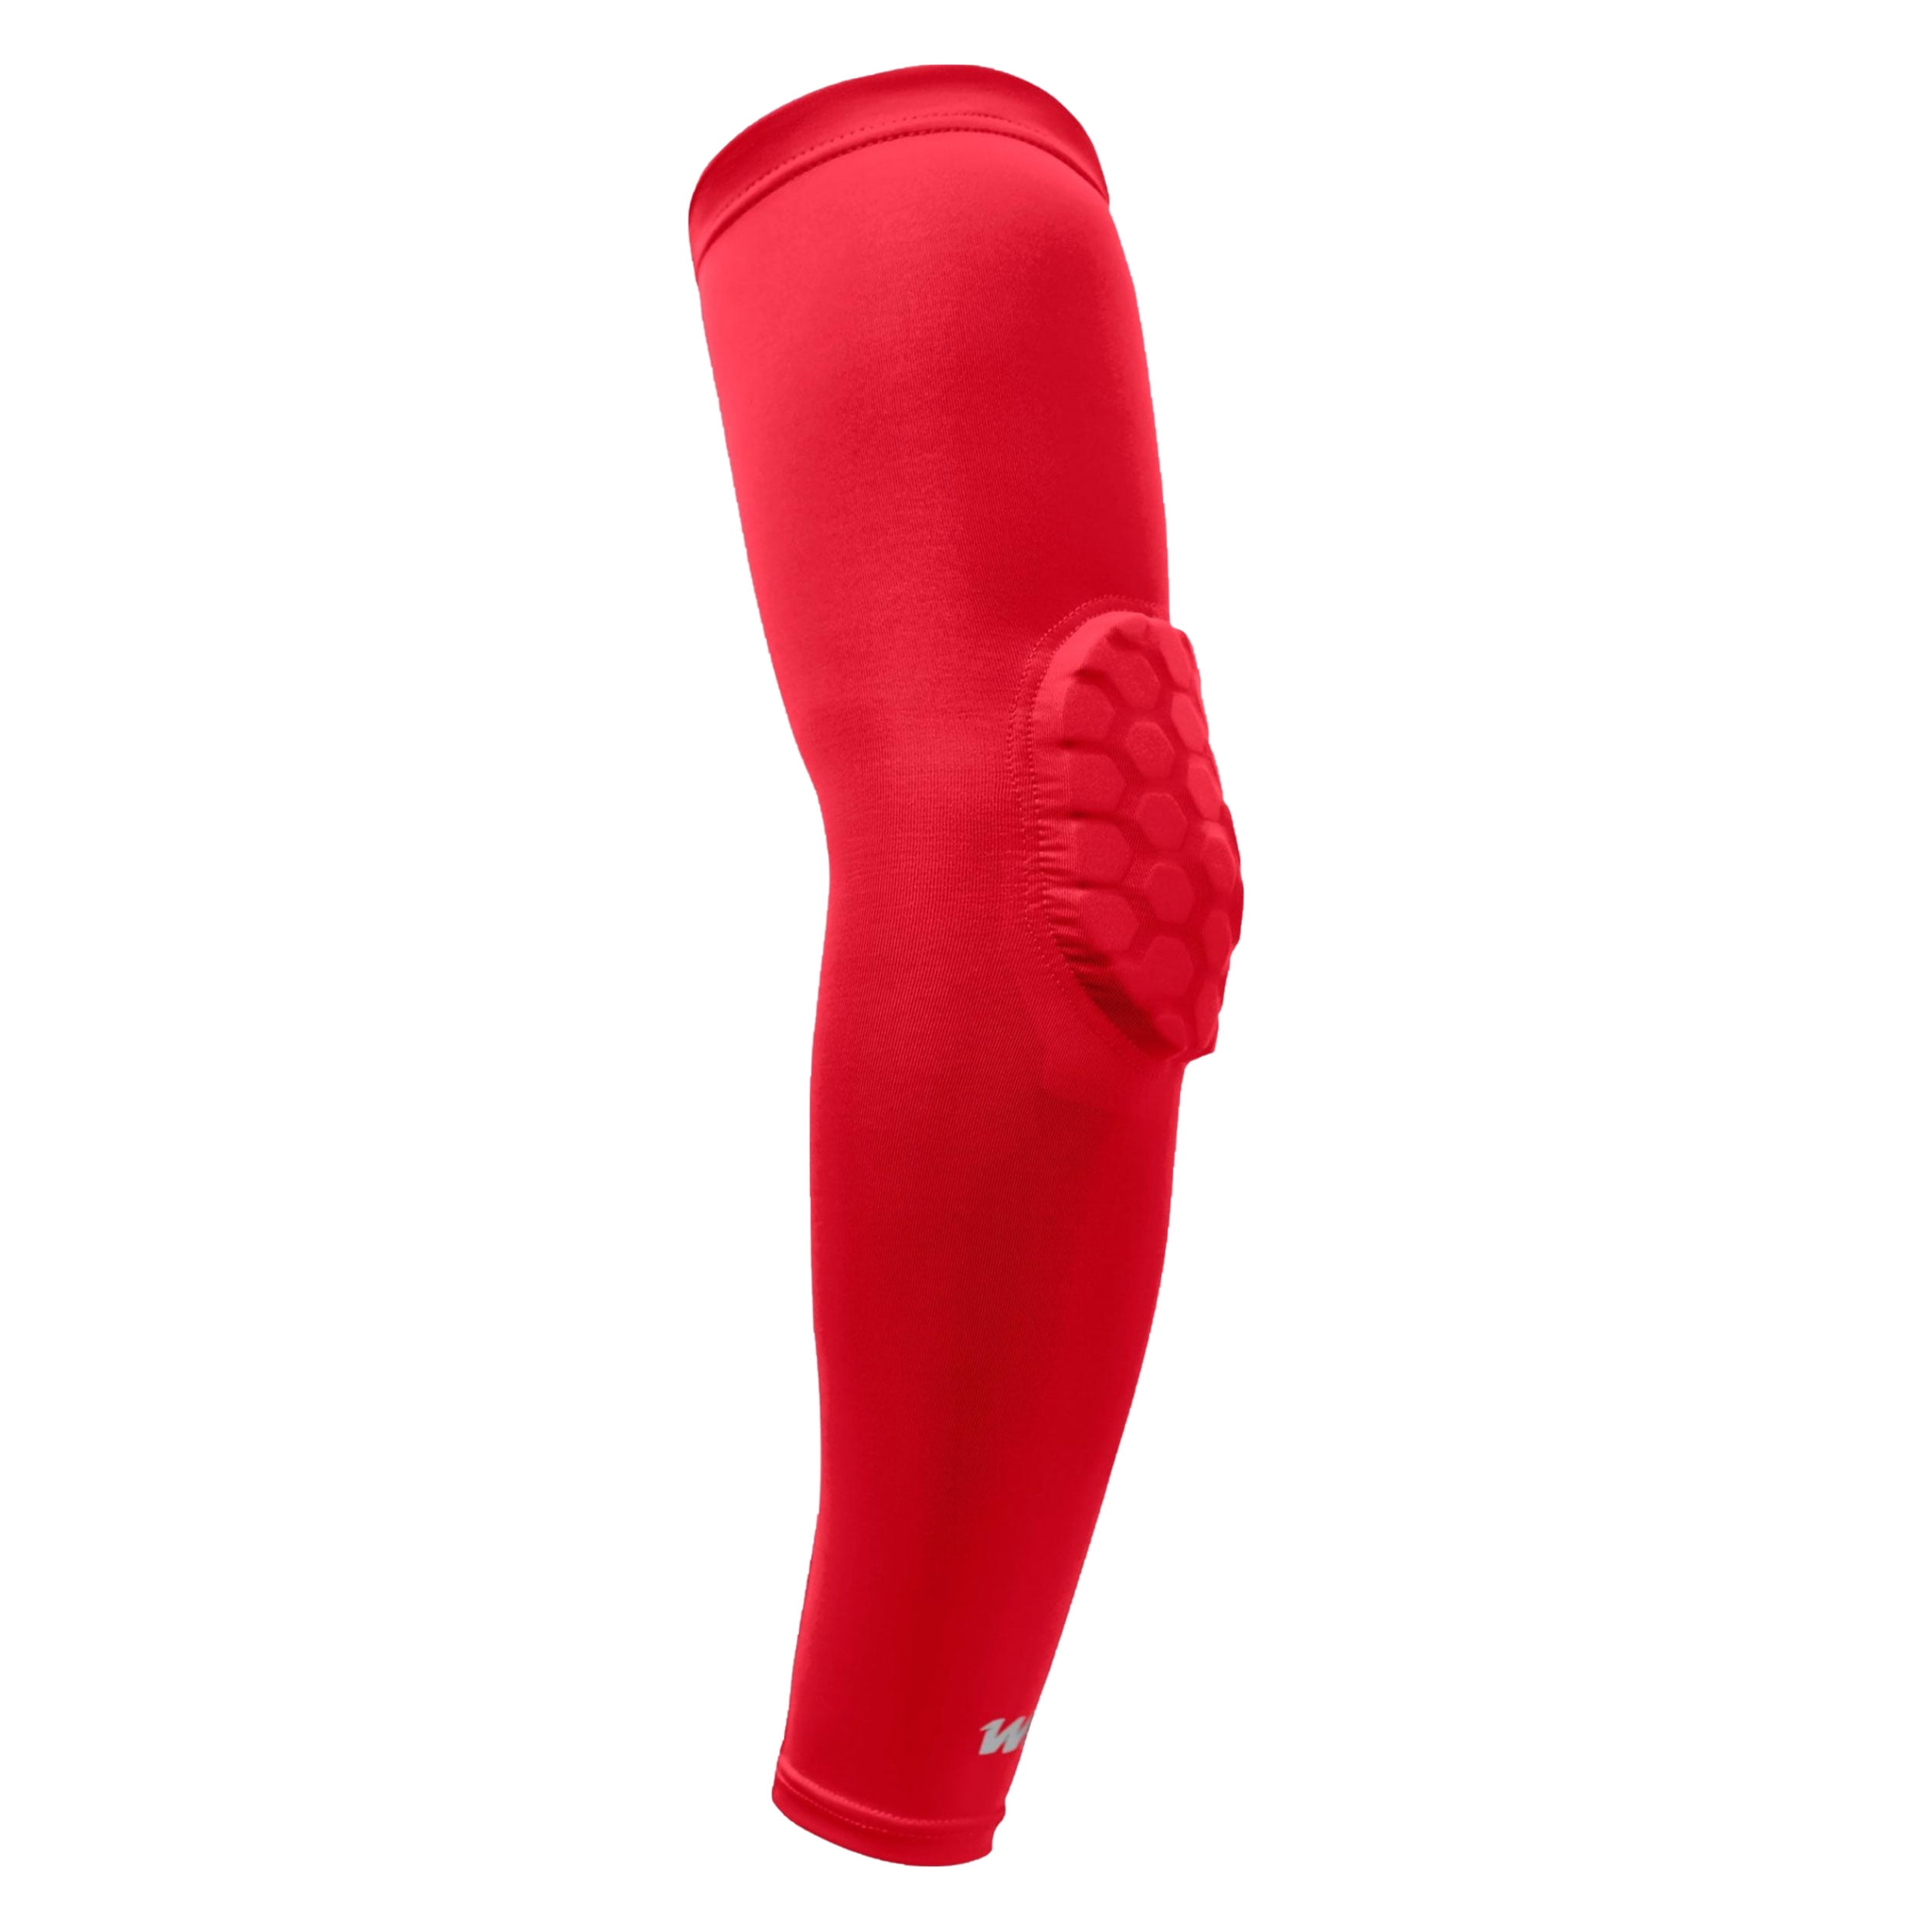 Carevas Leg Sleeves -Slip Leg Sleeves with Protective Knee Pads for  Basketball Volleyball Skating